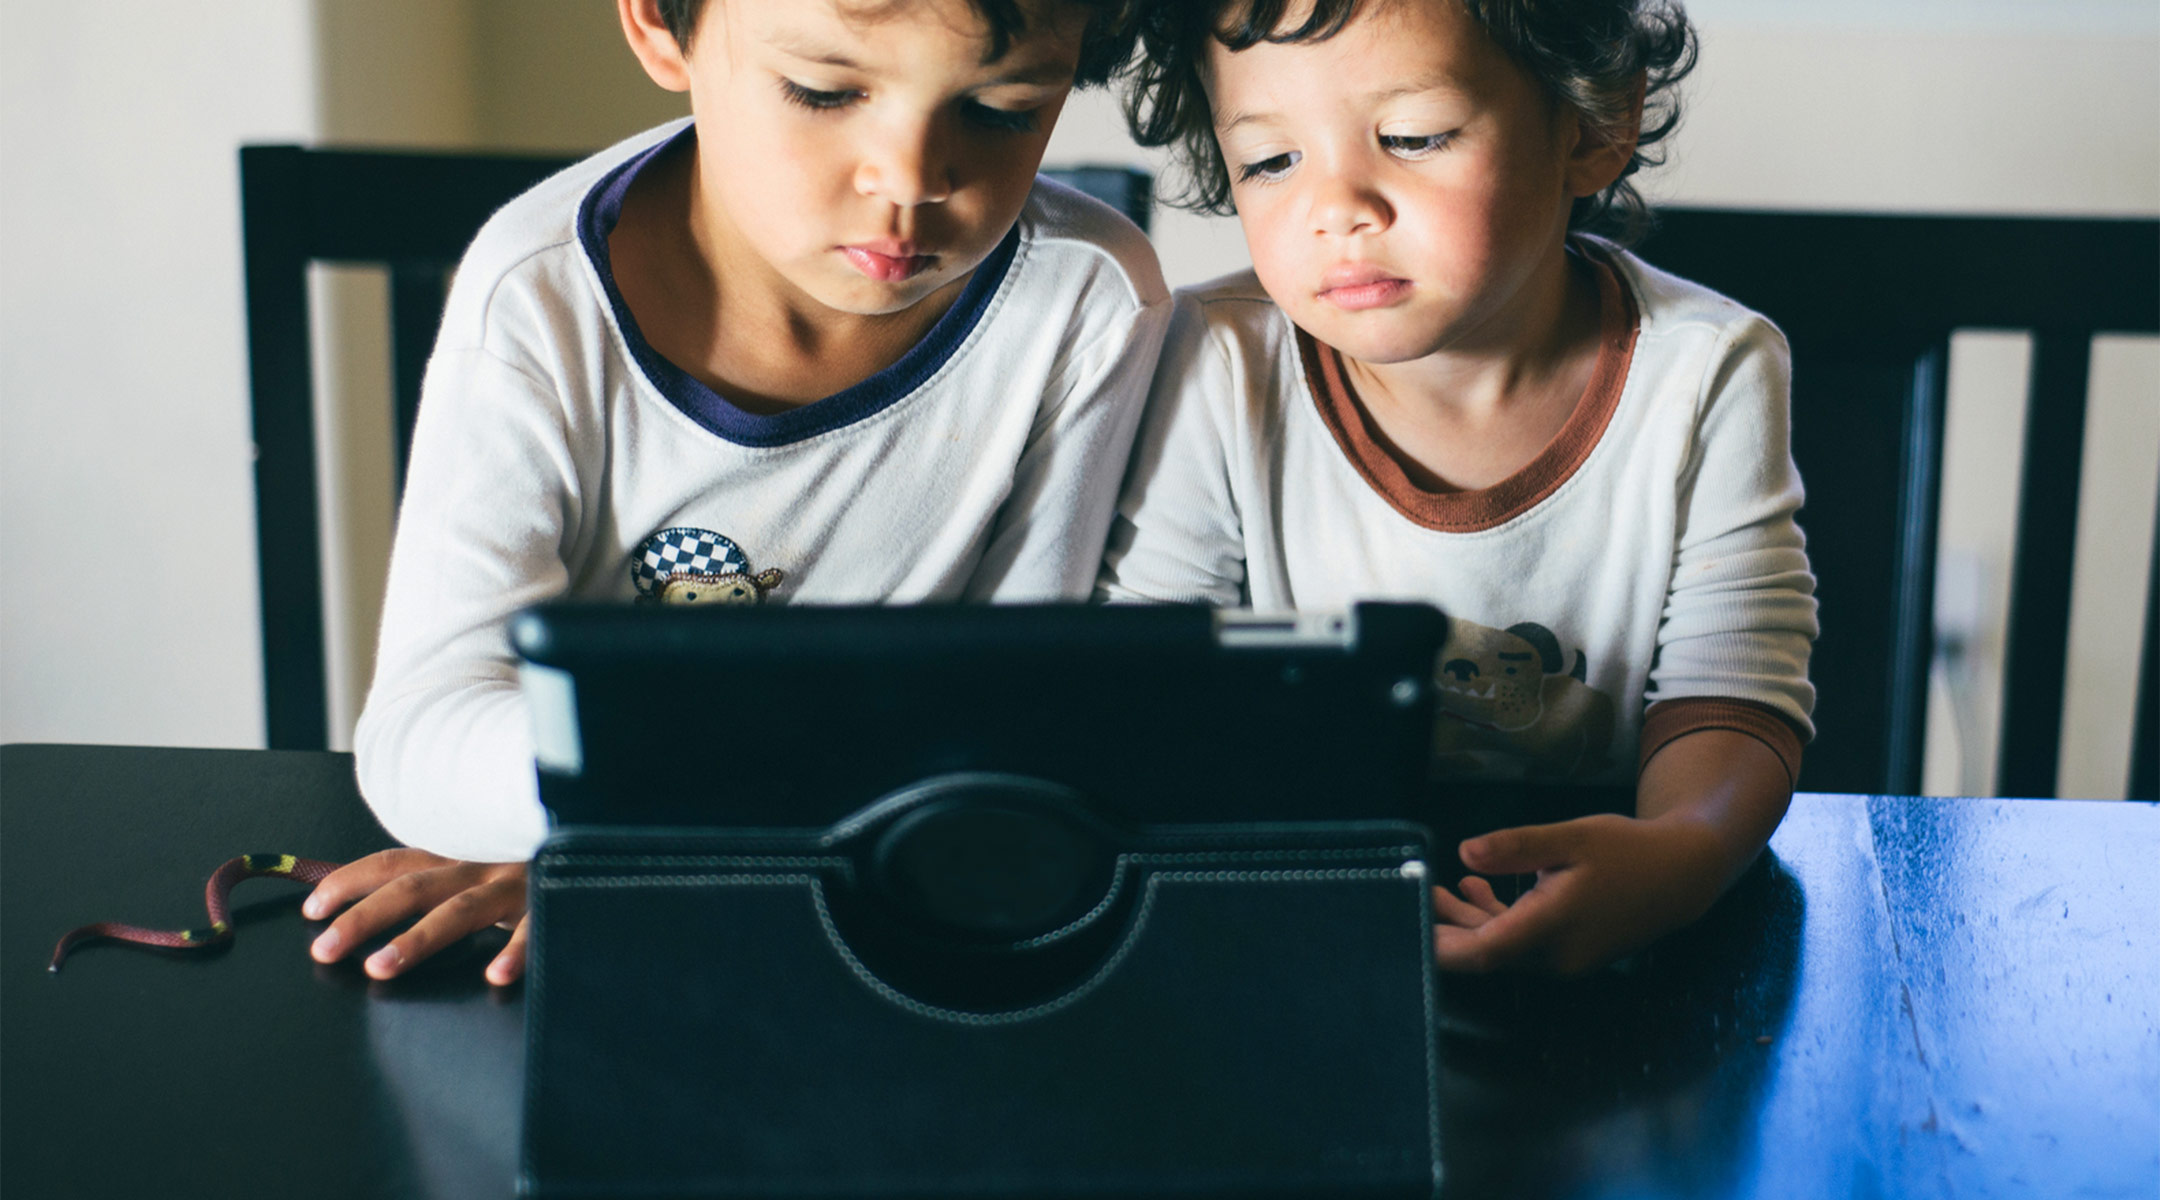 two sibling boys watching tablet device